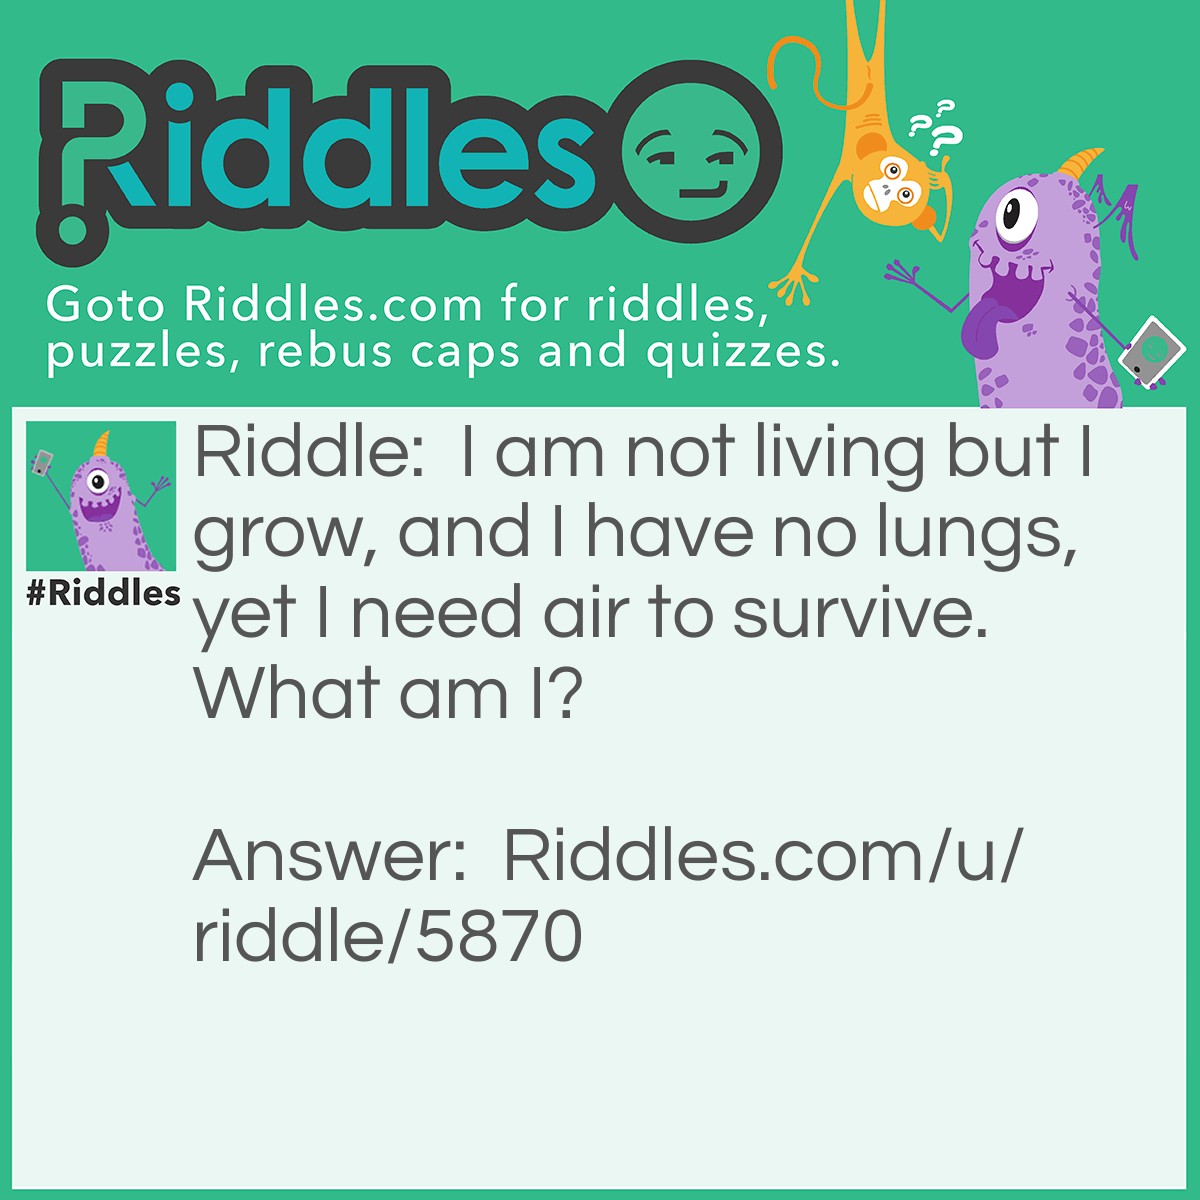 Riddle: I am not living but I grow, and I have no lungs, yet I need air to survive. What am I? Answer: Fire.